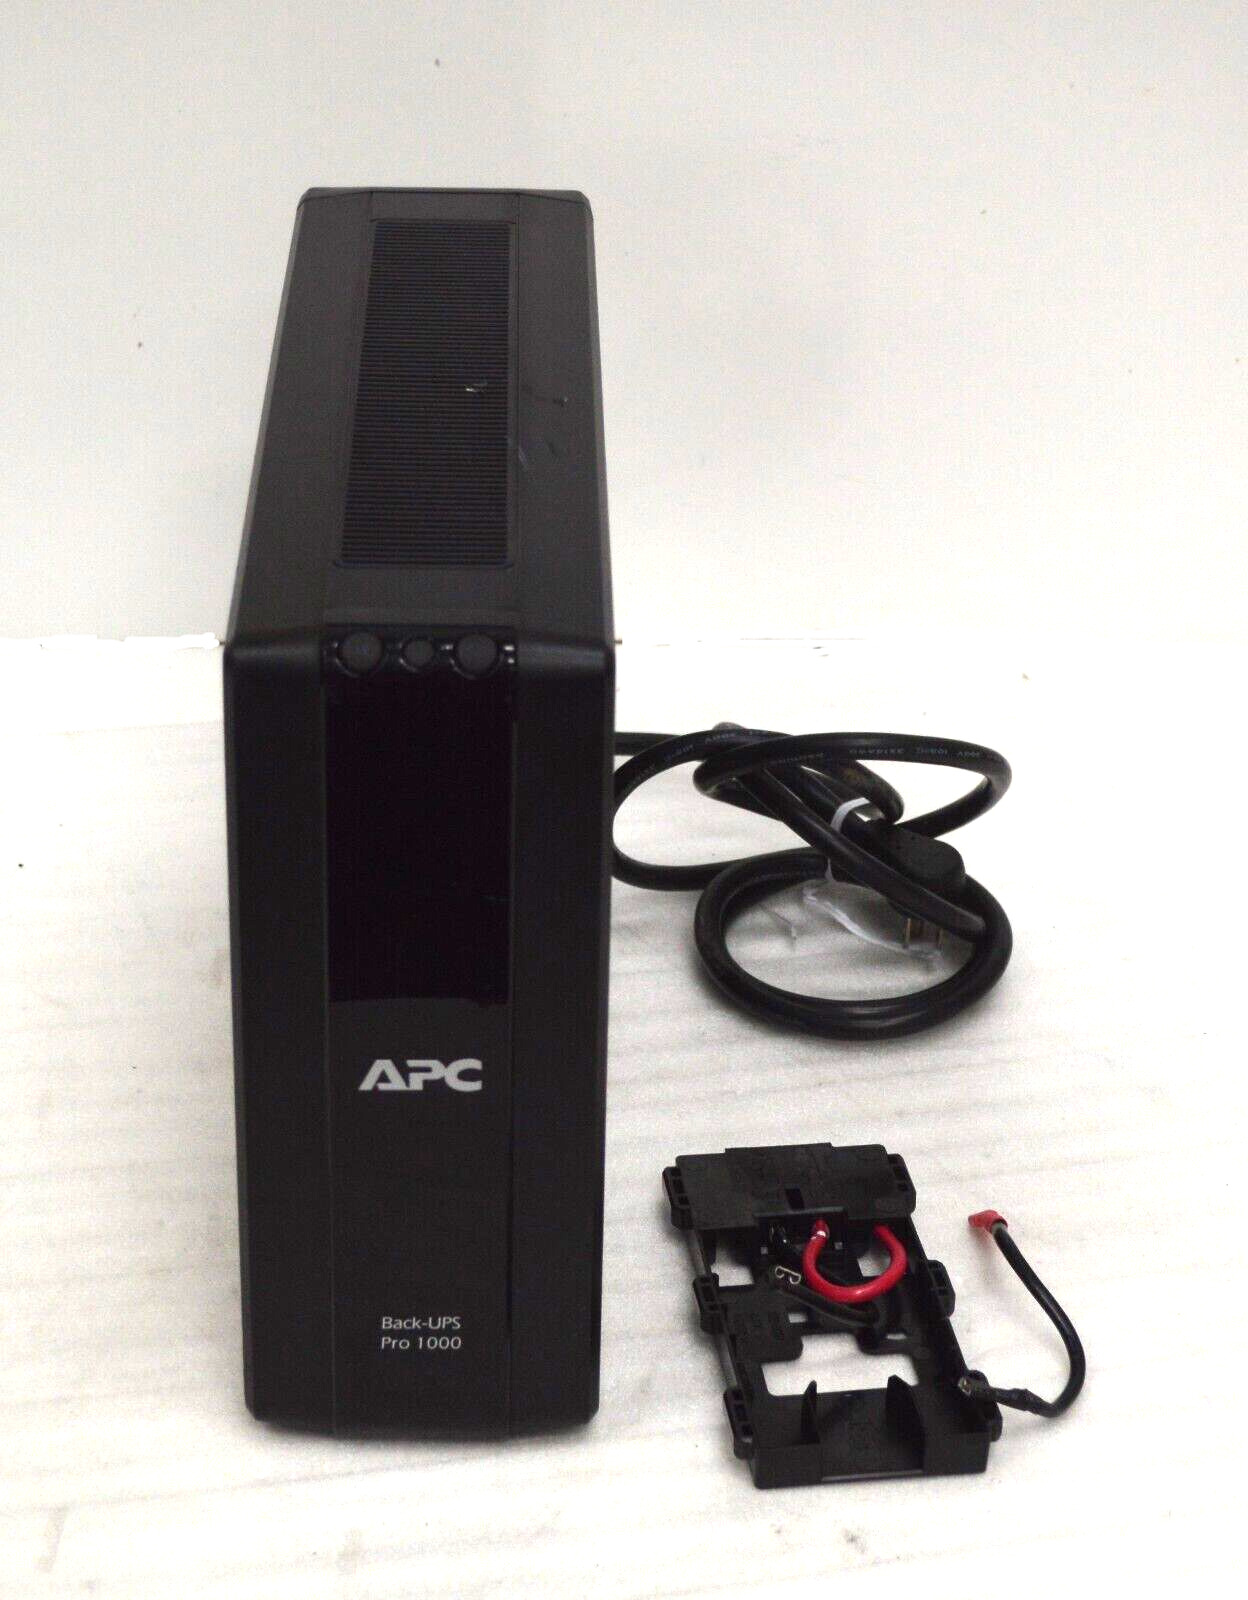 1x APC Back-UPS Pro 1000 8 Outlet UPS BR1000G w/RBC Battery Connector no Battery